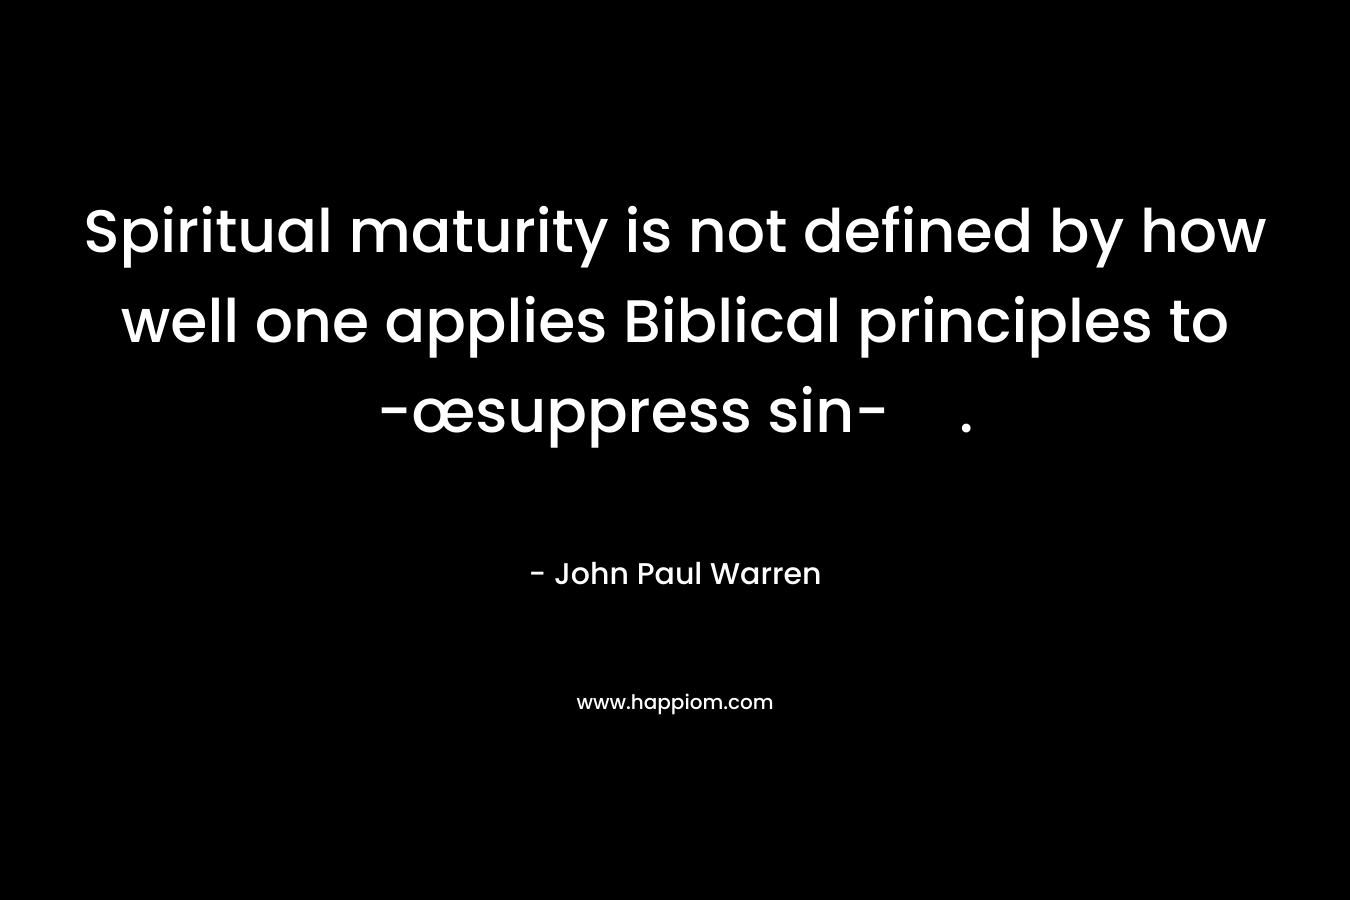 Spiritual maturity is not defined by how well one applies Biblical principles to -œsuppress sin-.